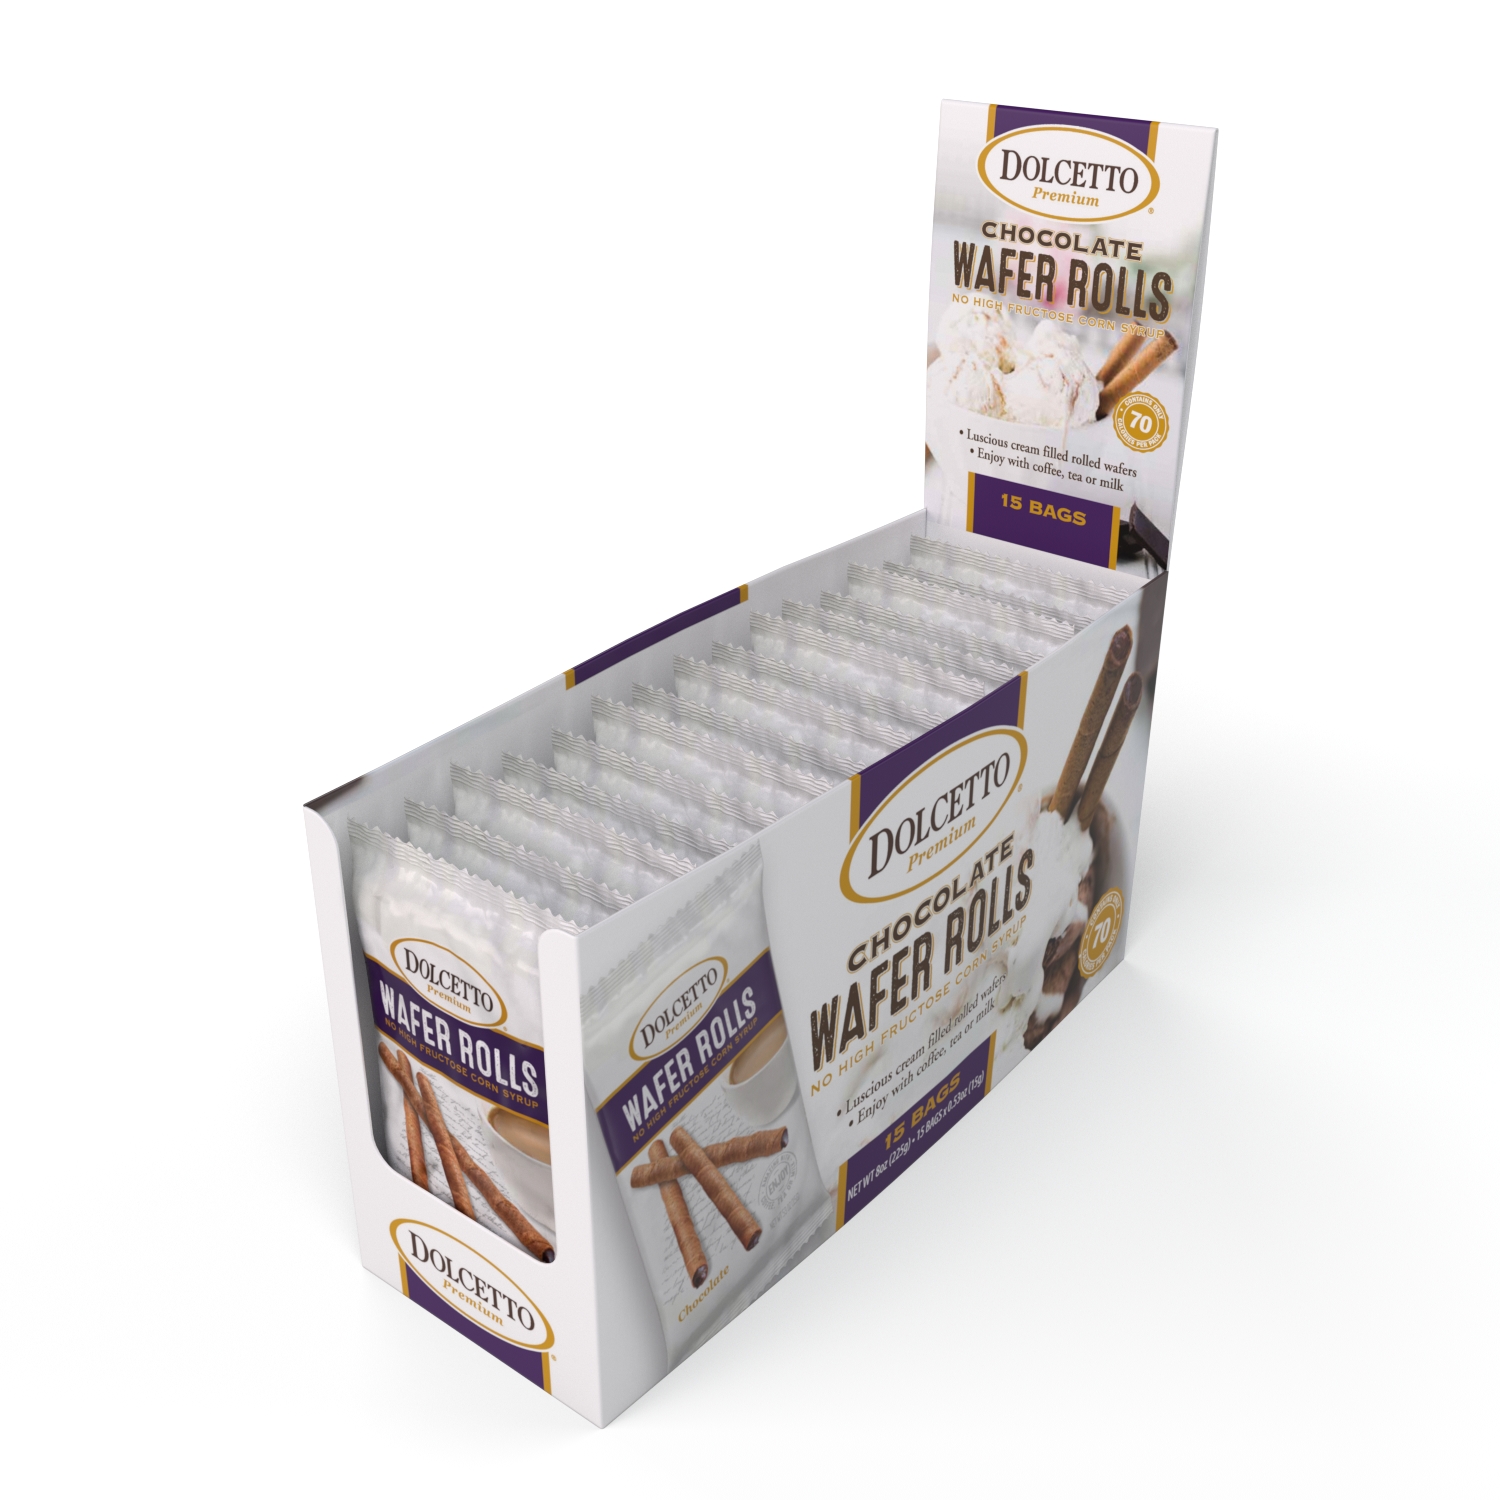 Dolcetto Wafer Rolls - Chocolate (0.53oz Single Serves - 15 per tray)